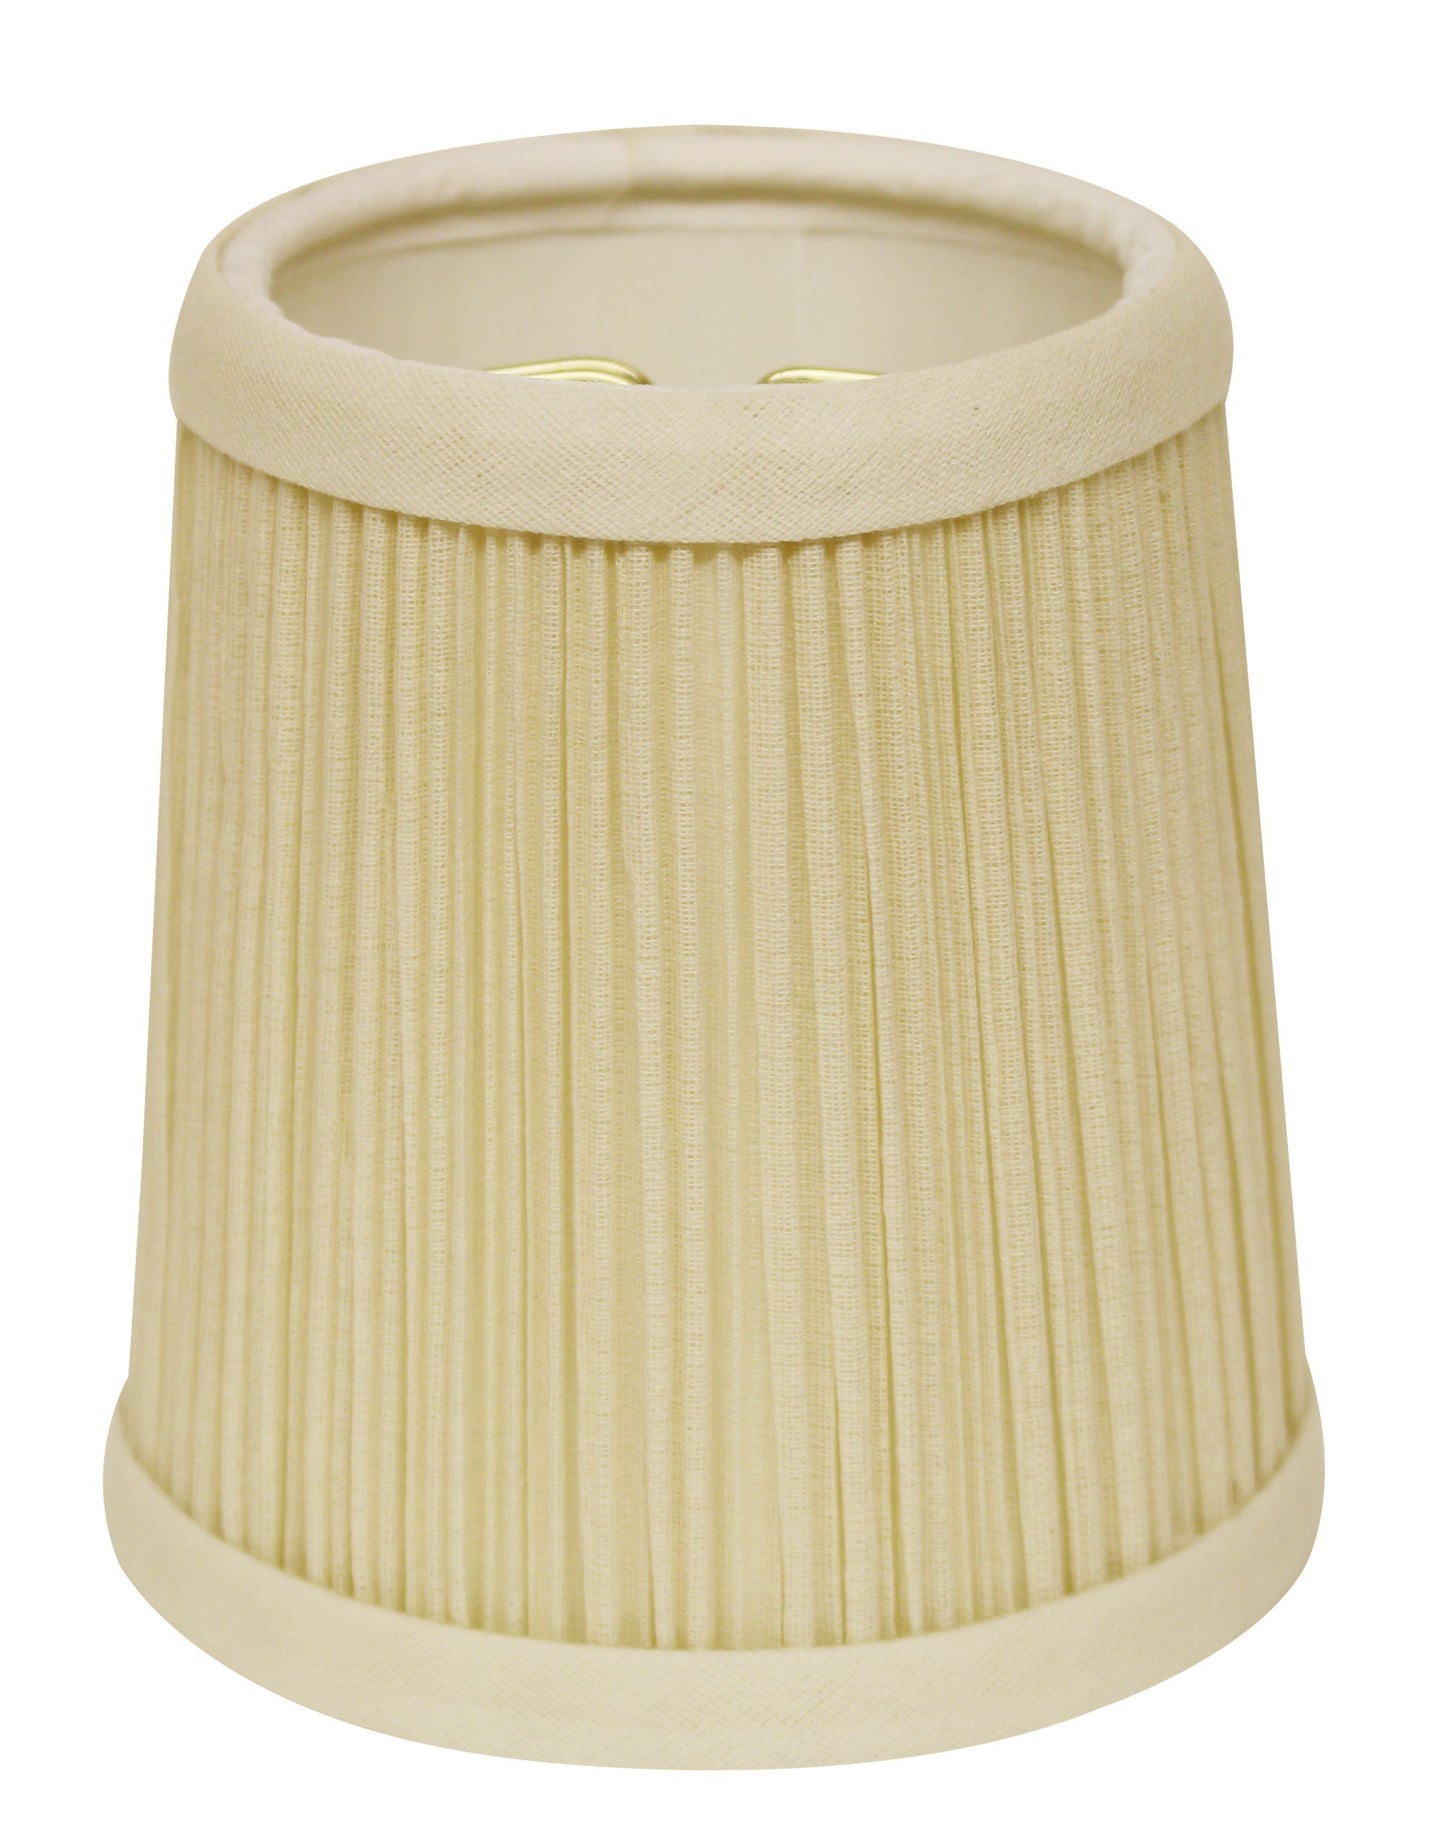 4" Ivory Set of 6 Chandelier Broadcloth Lampshades